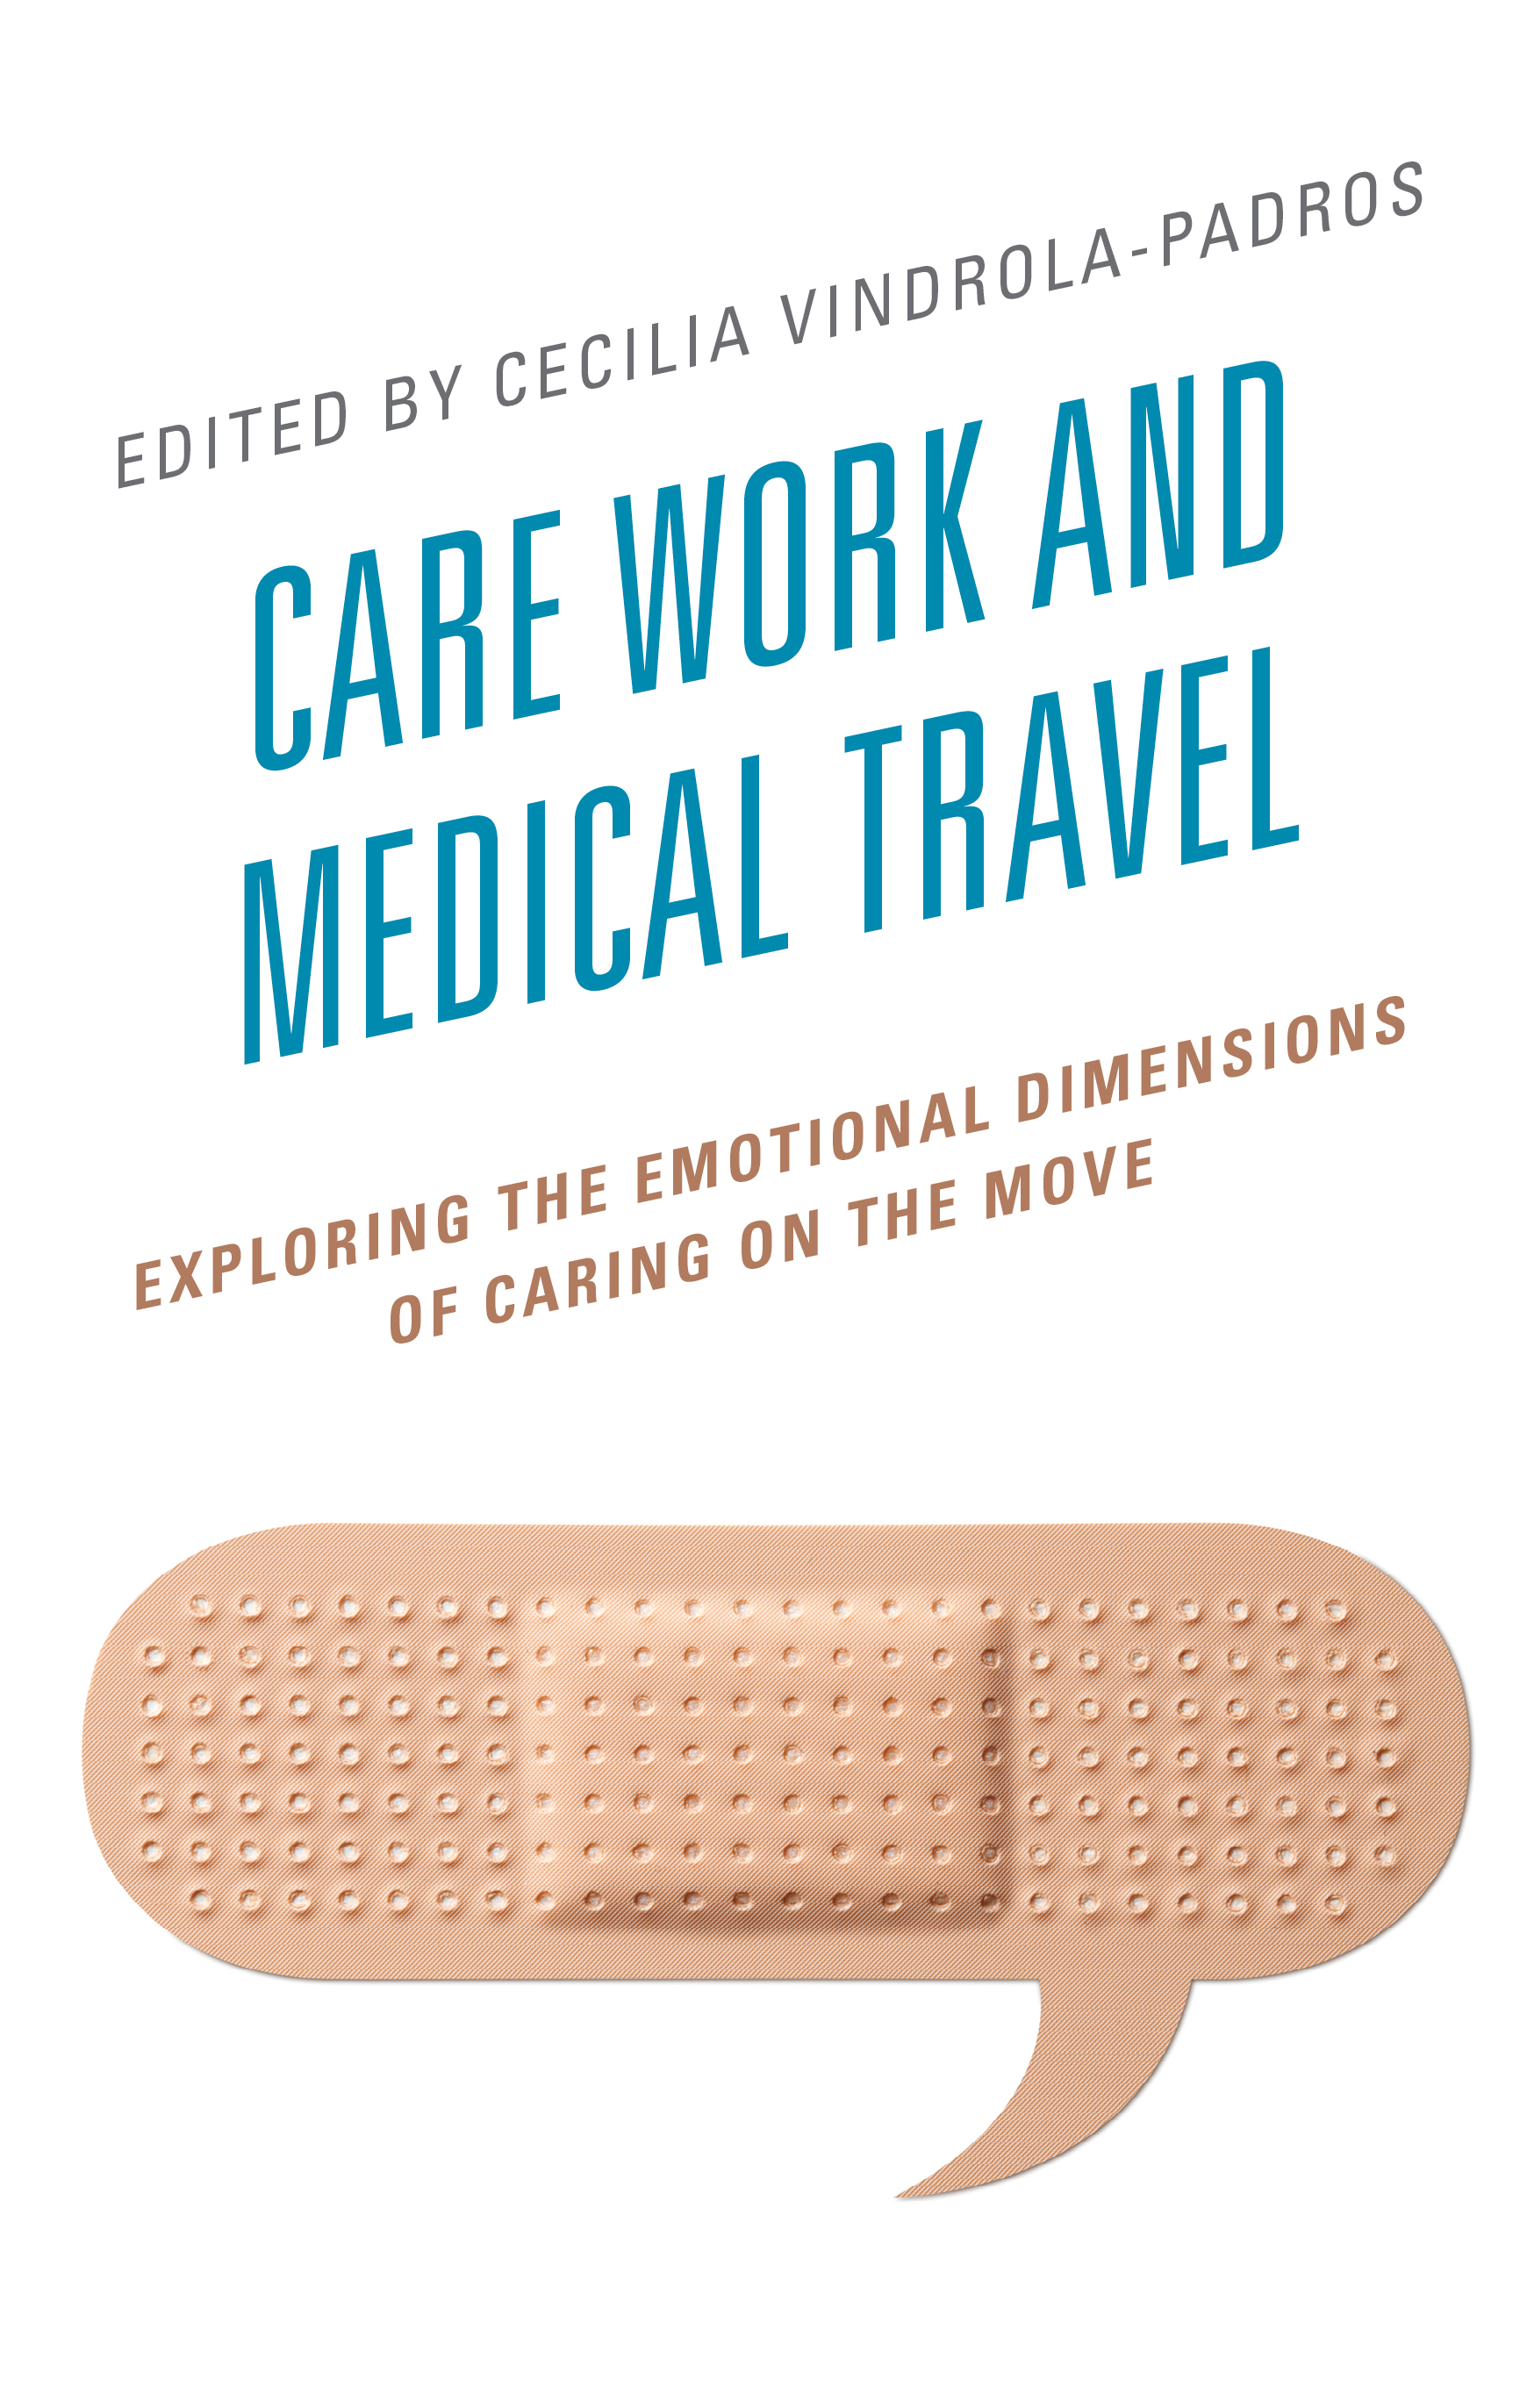 Care Work and Medical Travel: Exploring the Emotional Dimensions of Caring on the Move